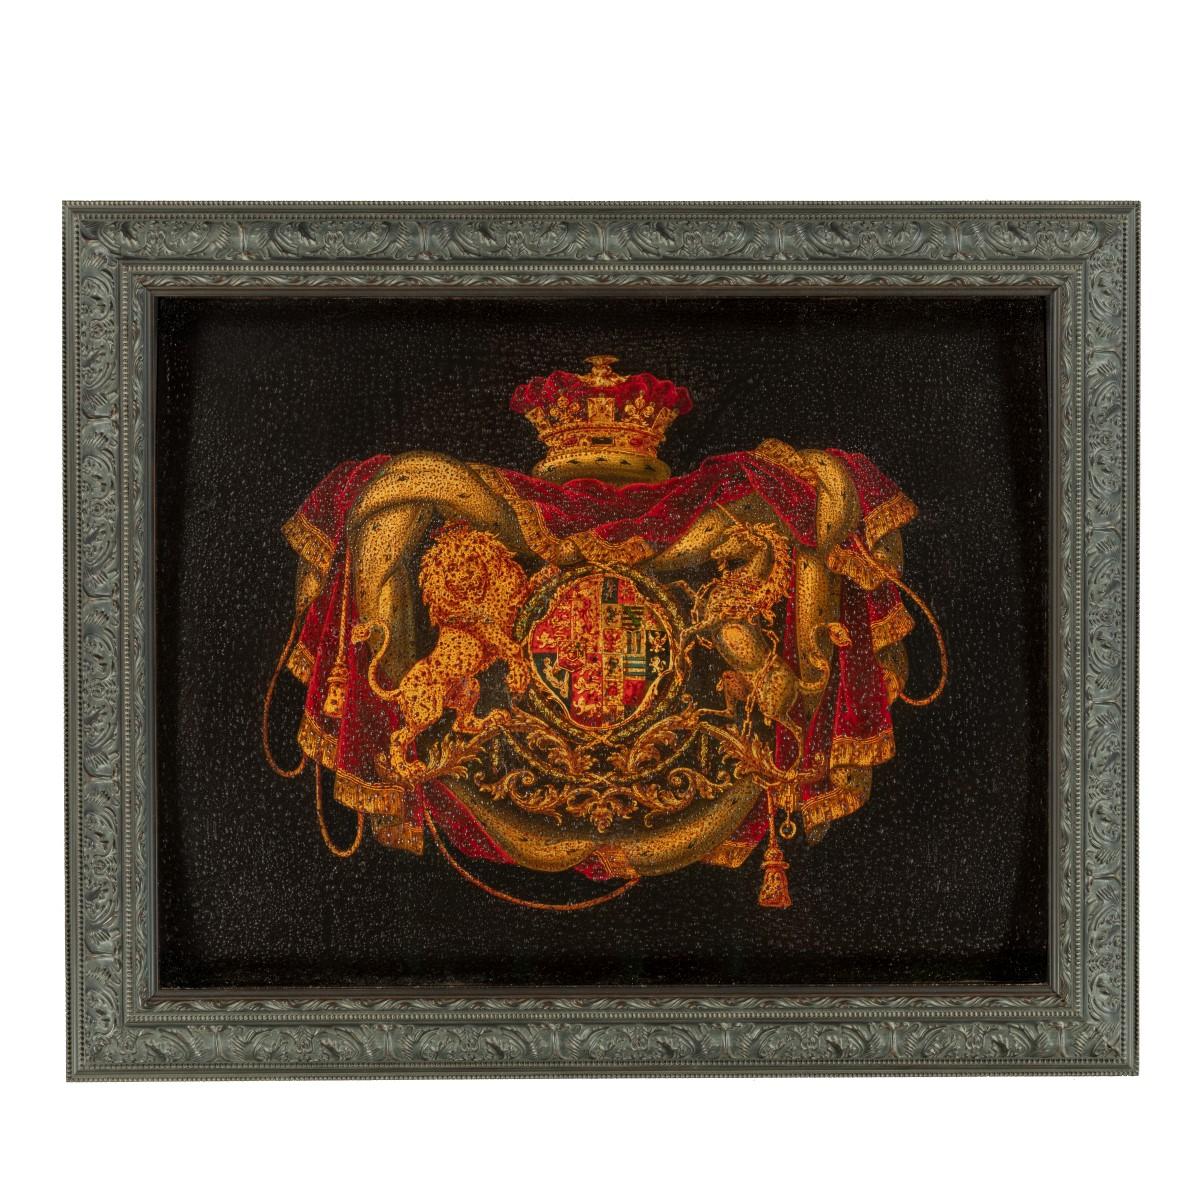 These two wood panels are of rectangular form, one with rounded corners. Each is painted with a large Royal coat of arms flanked by a lion and a unicorn surmounted by a queen’s crown and red velvet mantling trimmed with ermine, gold fringes and